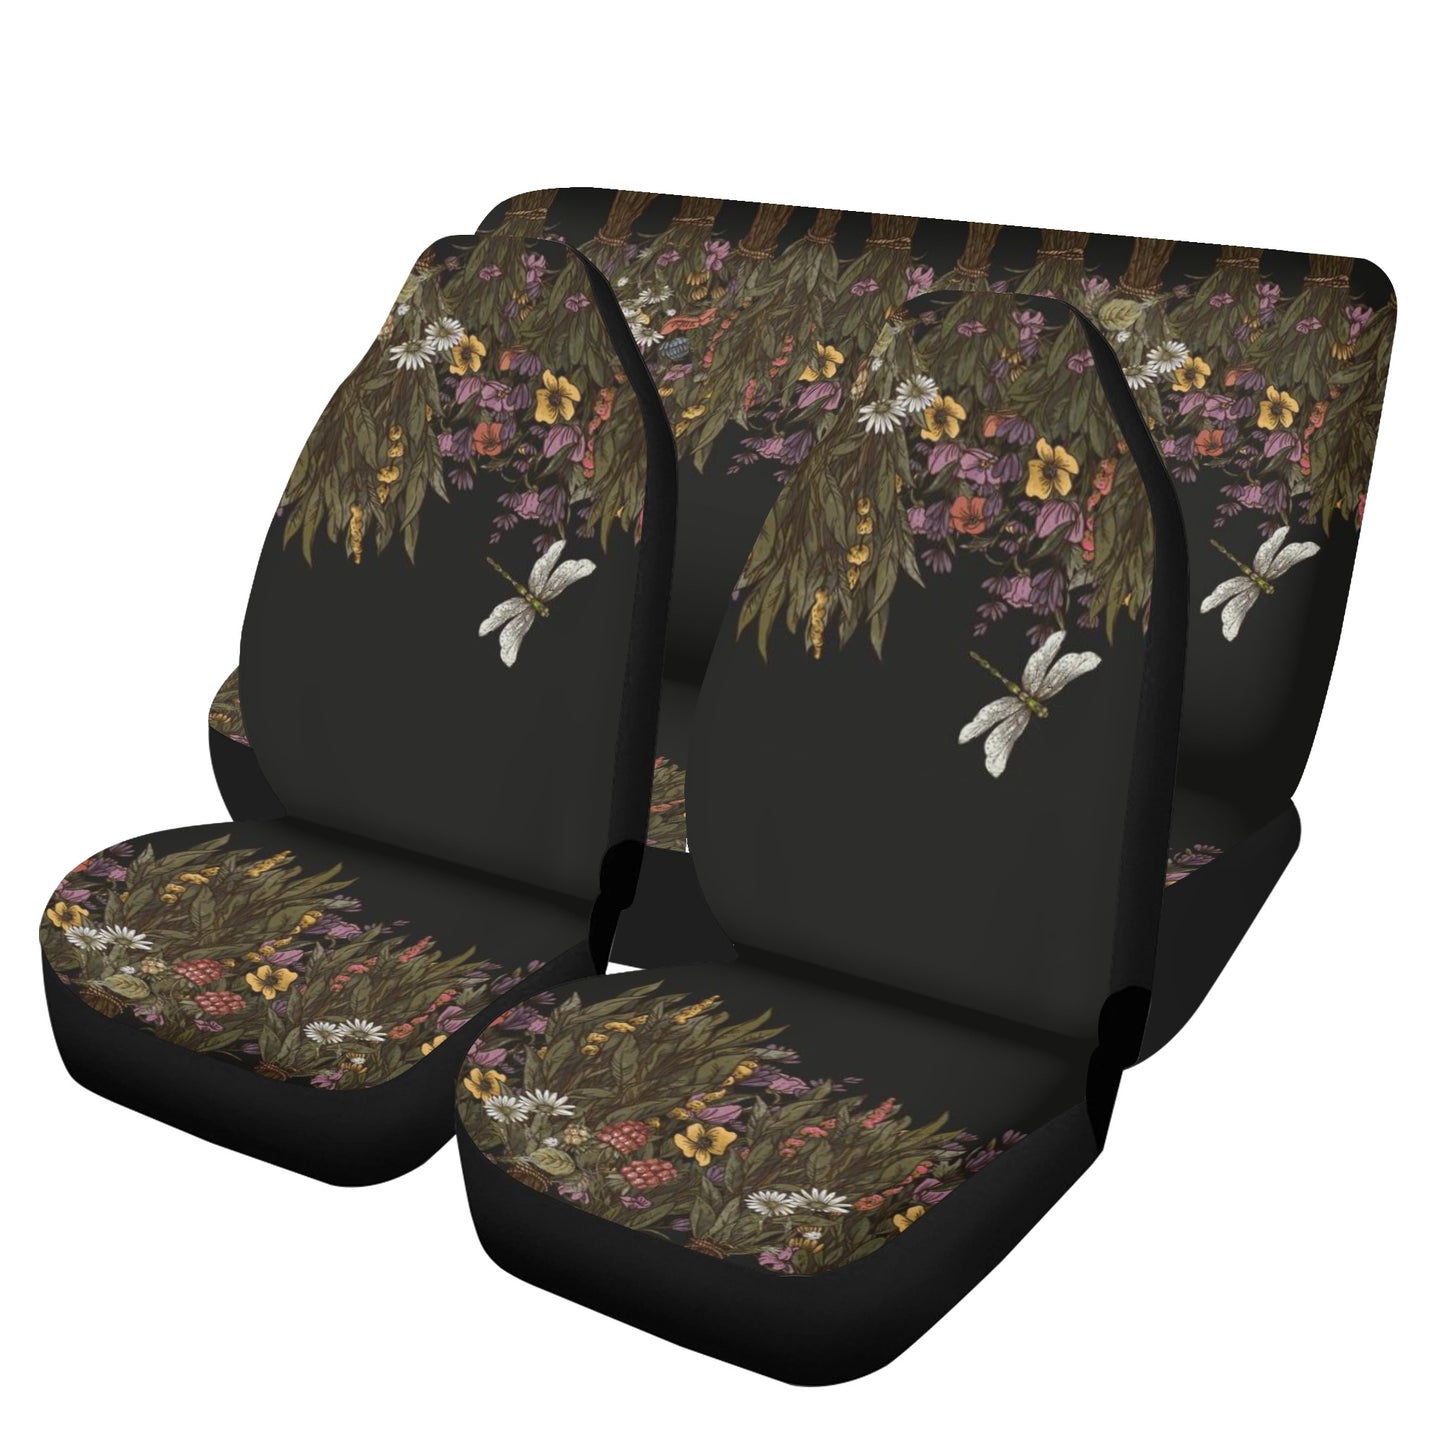 Green witch dried flower Car Seat Cover Set